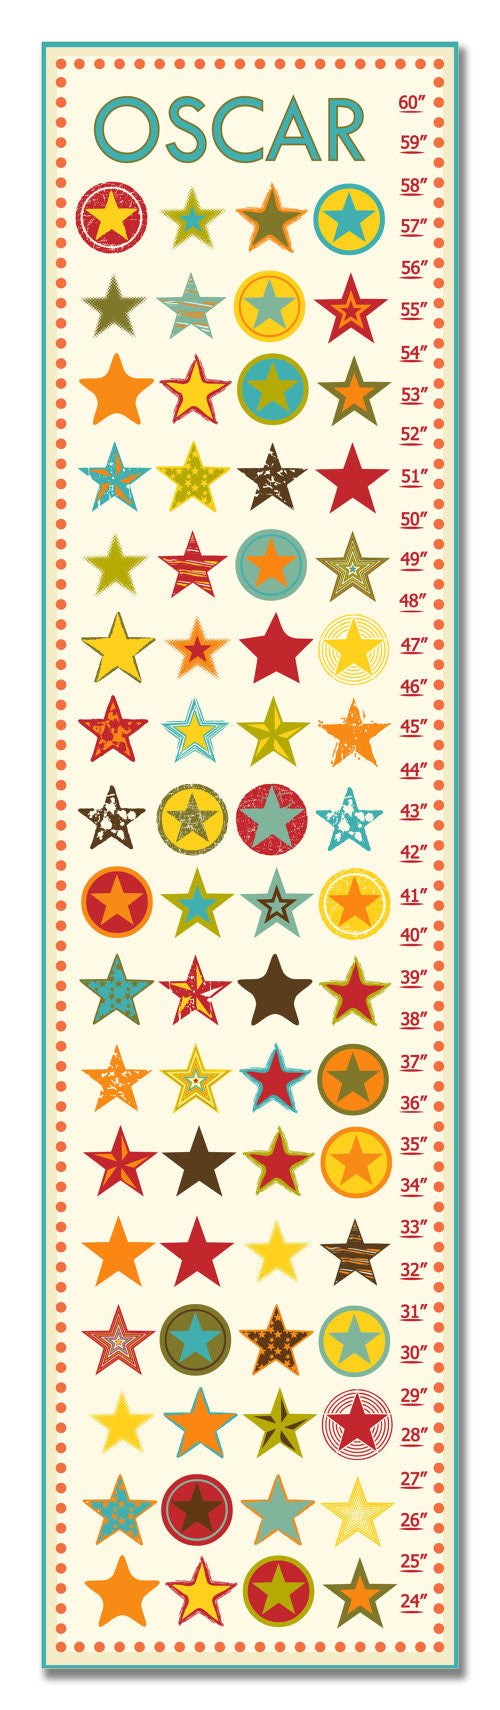 Stars Personalized Growth Chart